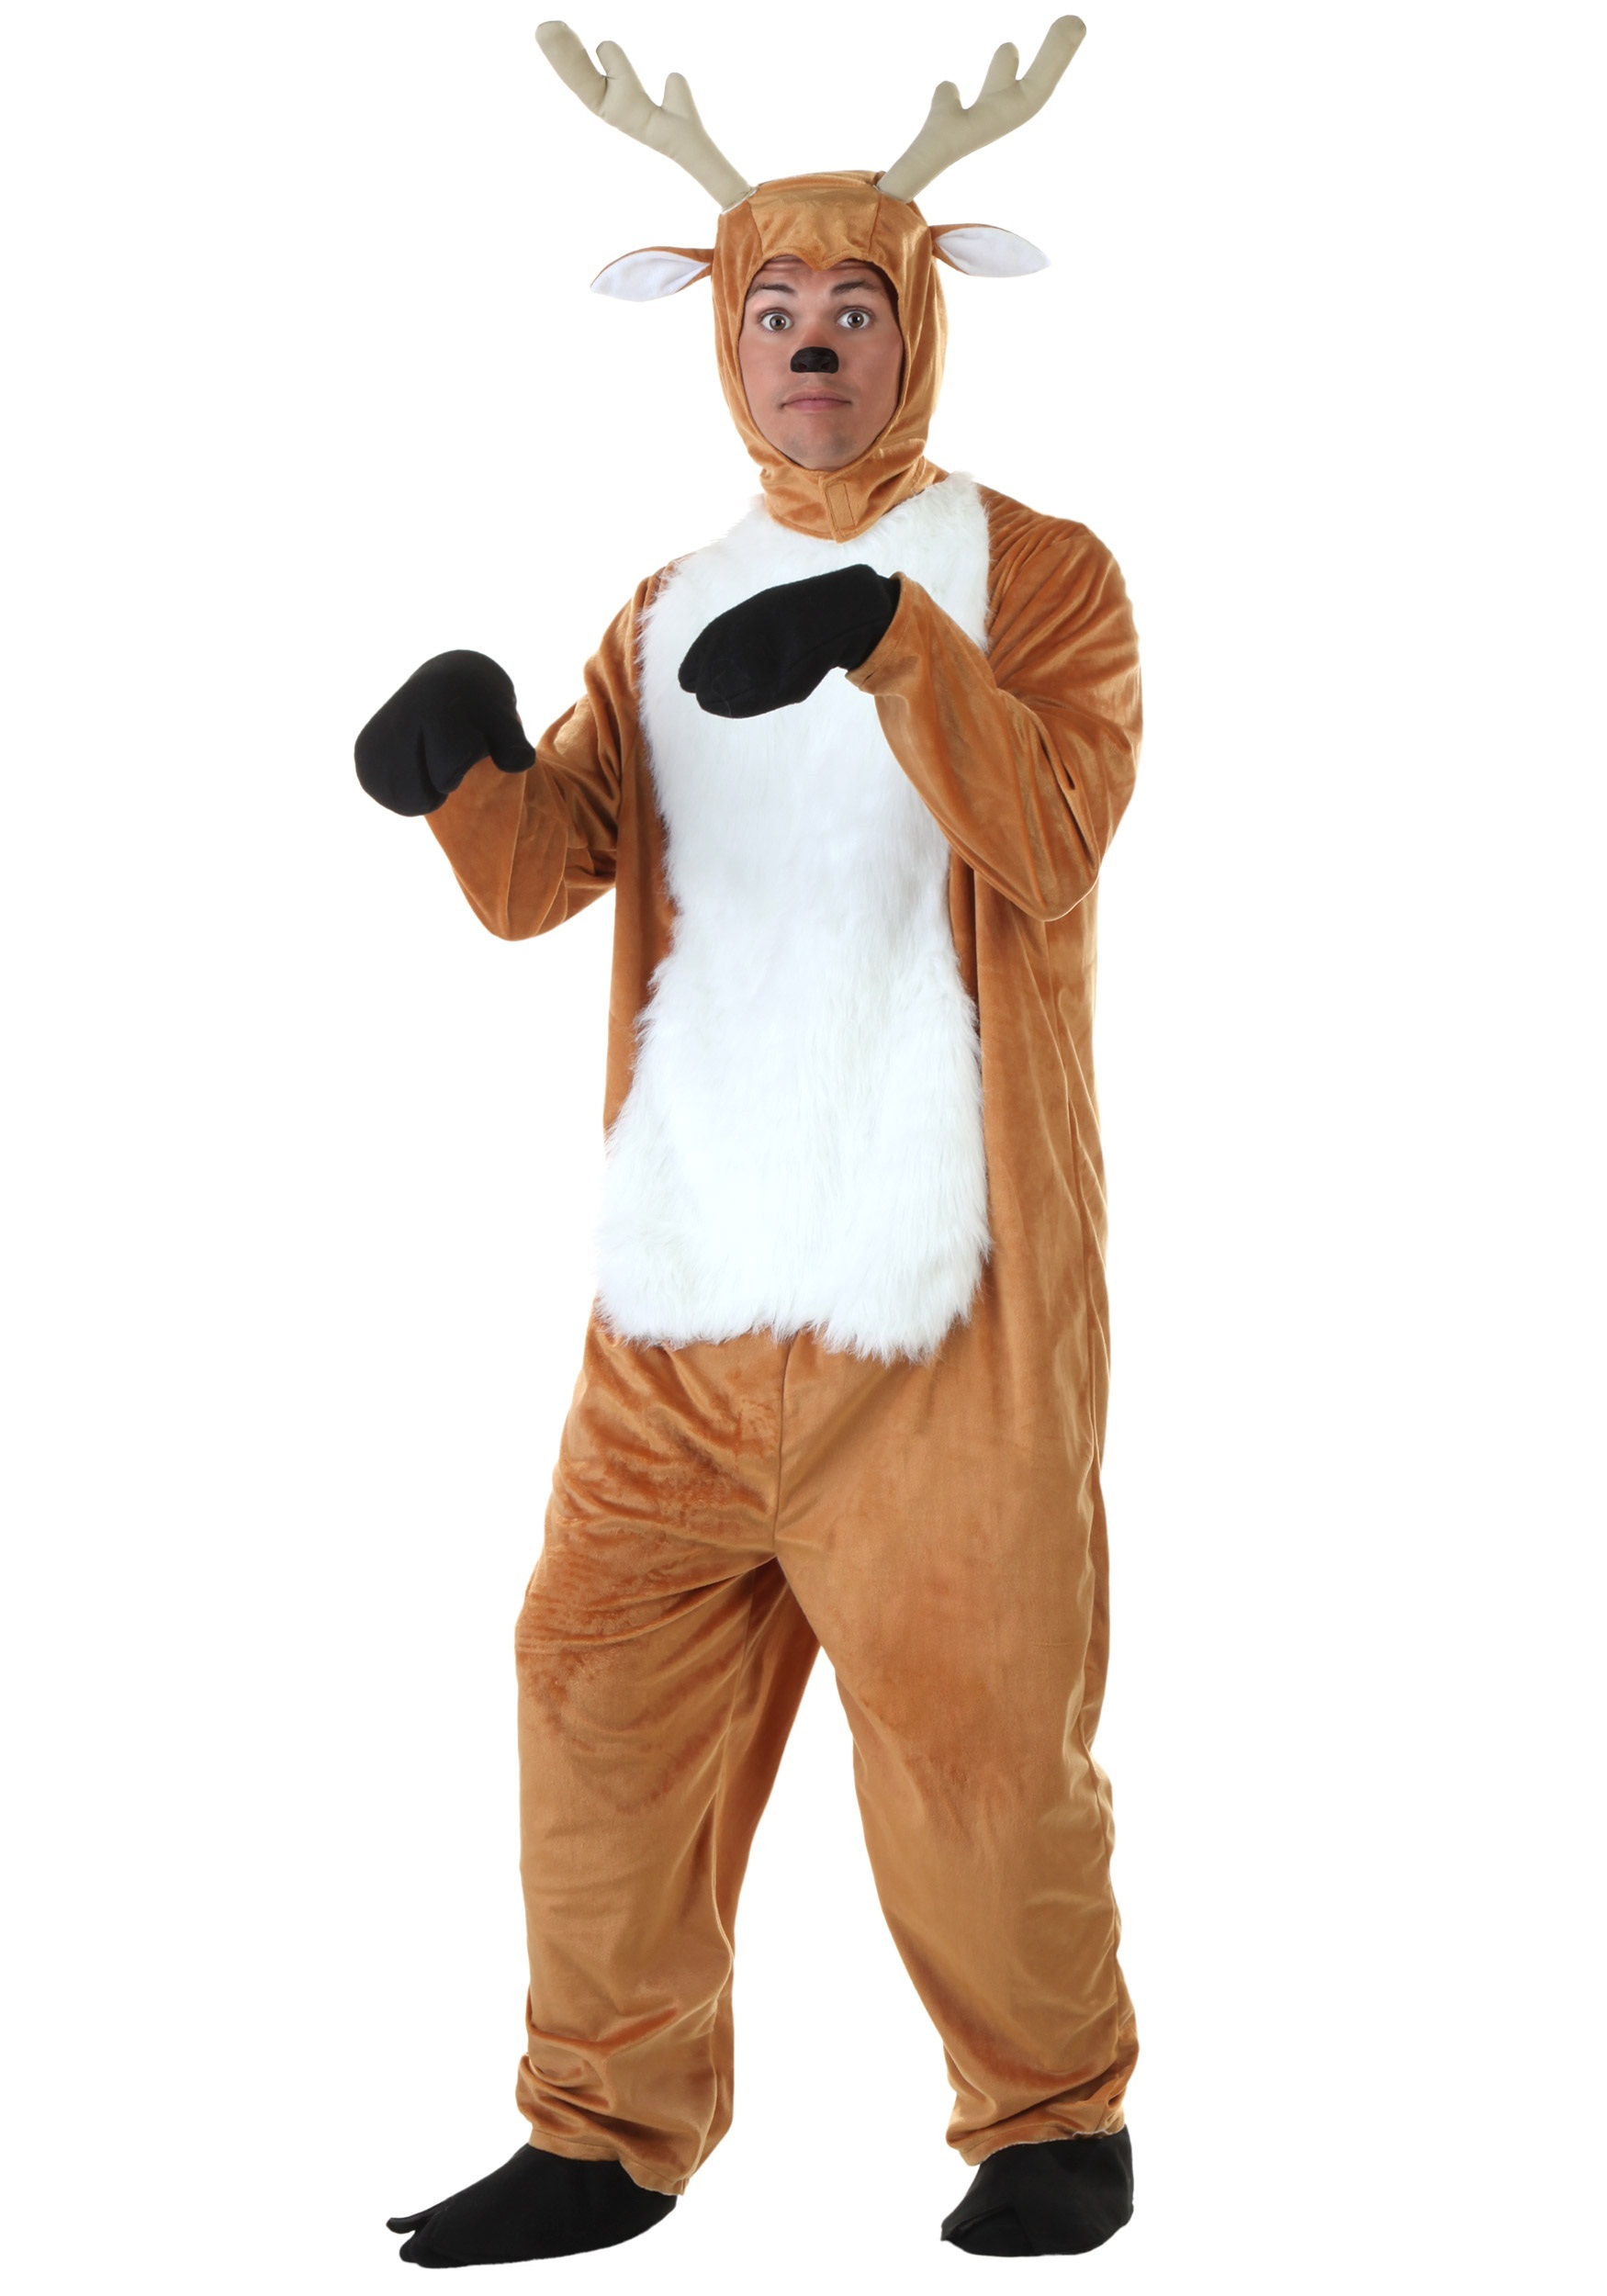 Photos - Fancy Dress FUN Costumes Plus Size Brown Deer Costume for Adults Brown FUN1312PL